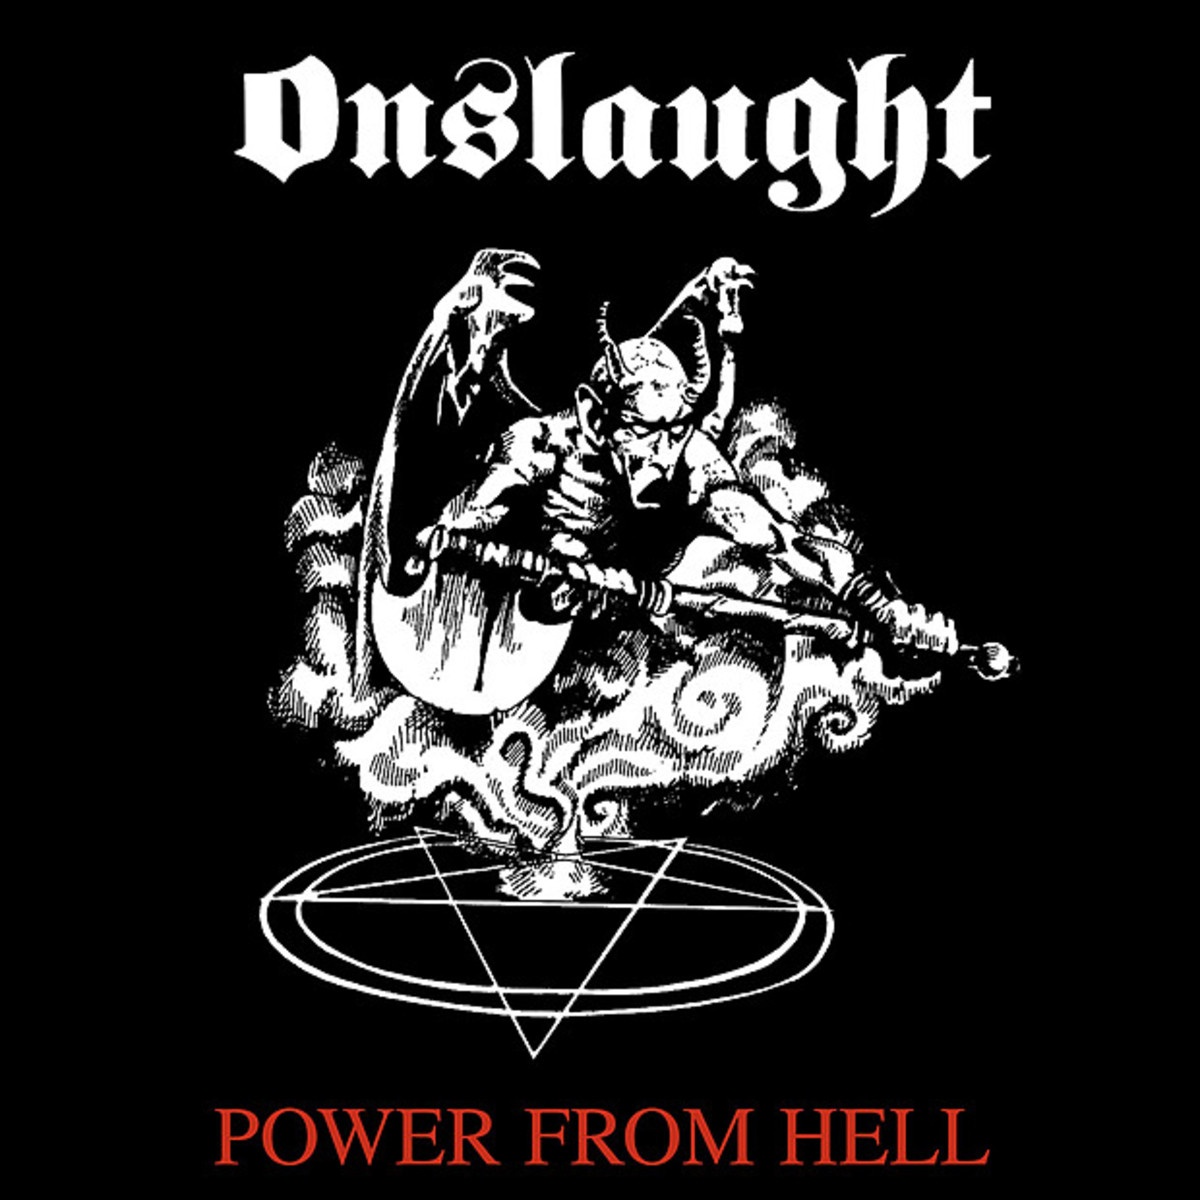 Onslaught (Power From Hell)